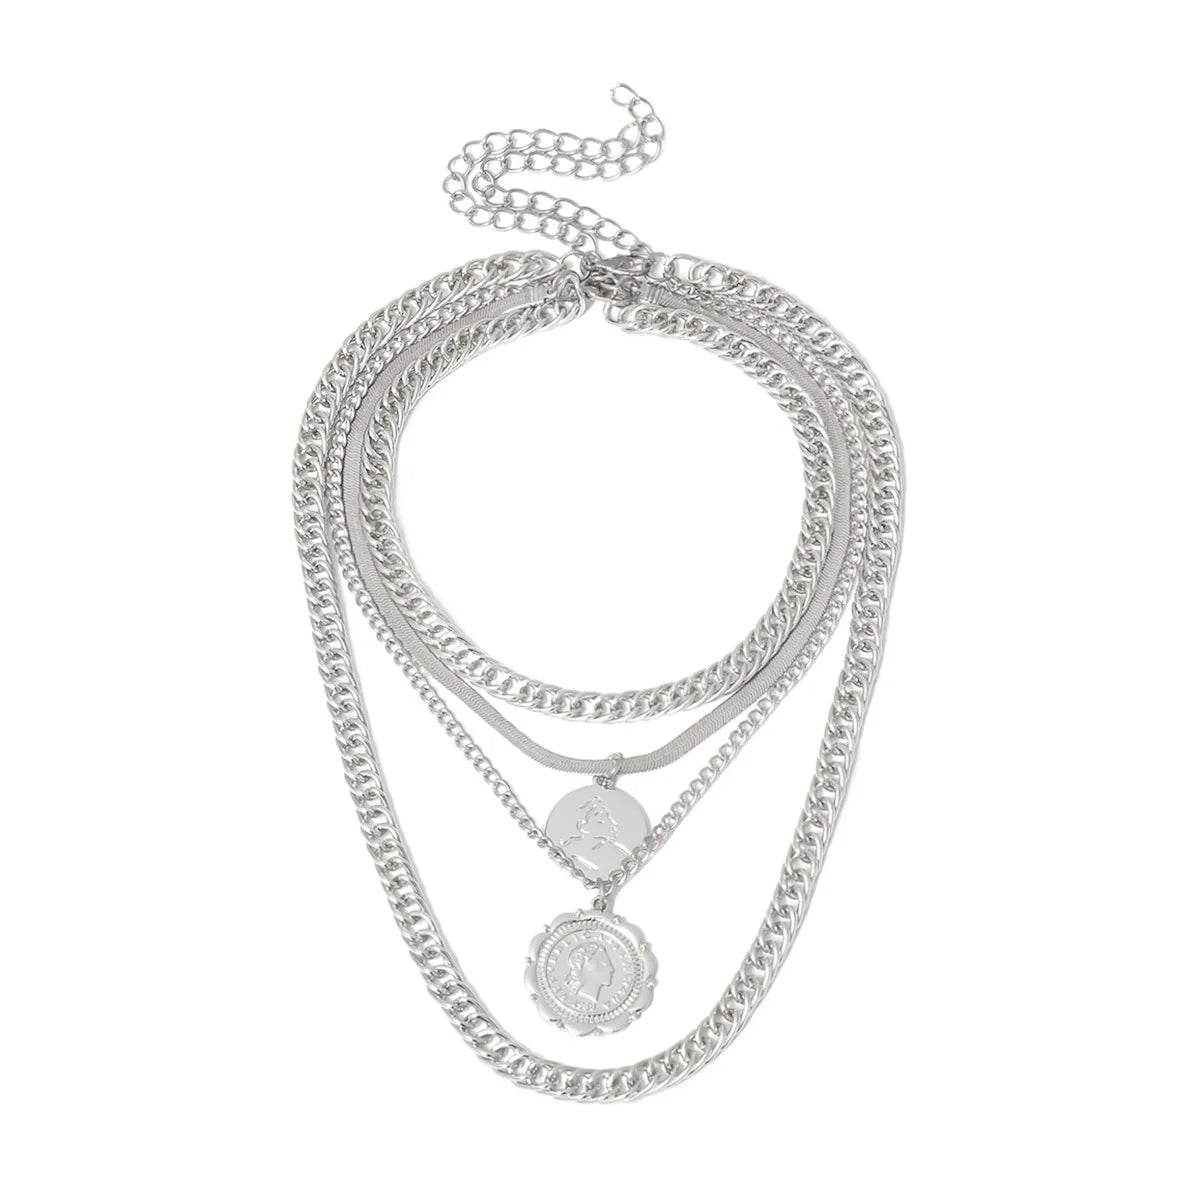 Thick chain with four layers, two layers of chain and two layers of pendant